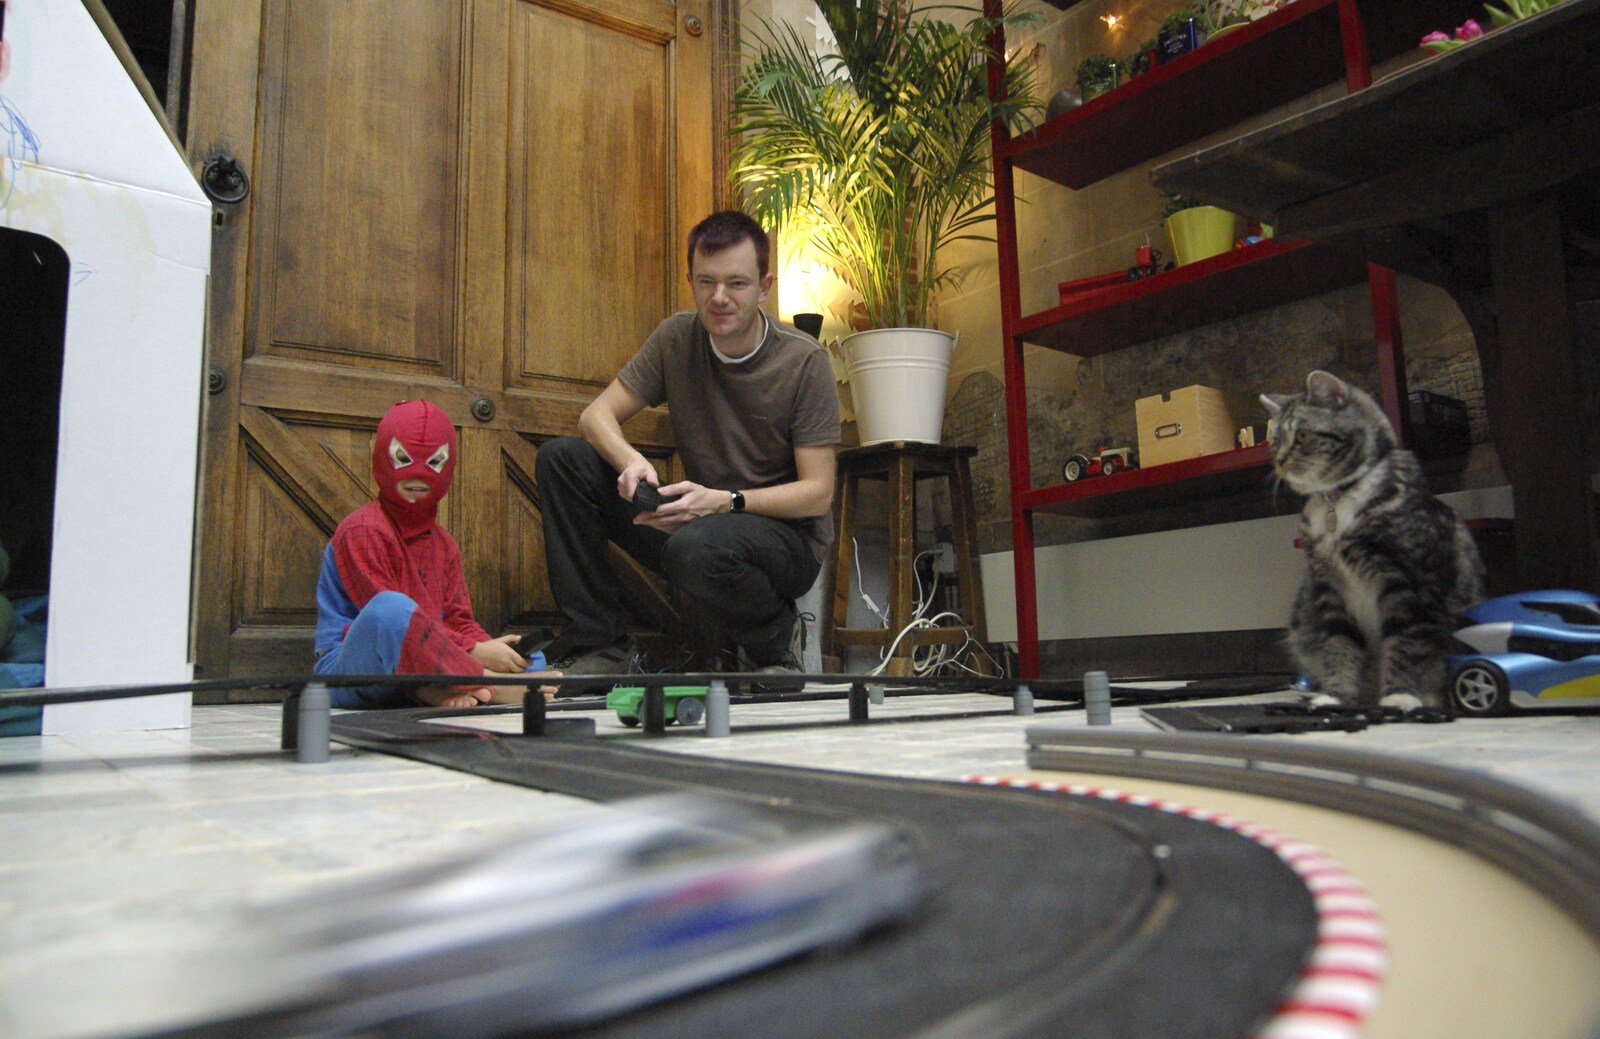 Nosher and Natan play Scalextric from The Christmas Markets of Brussels, Belgium - 1st January 2007